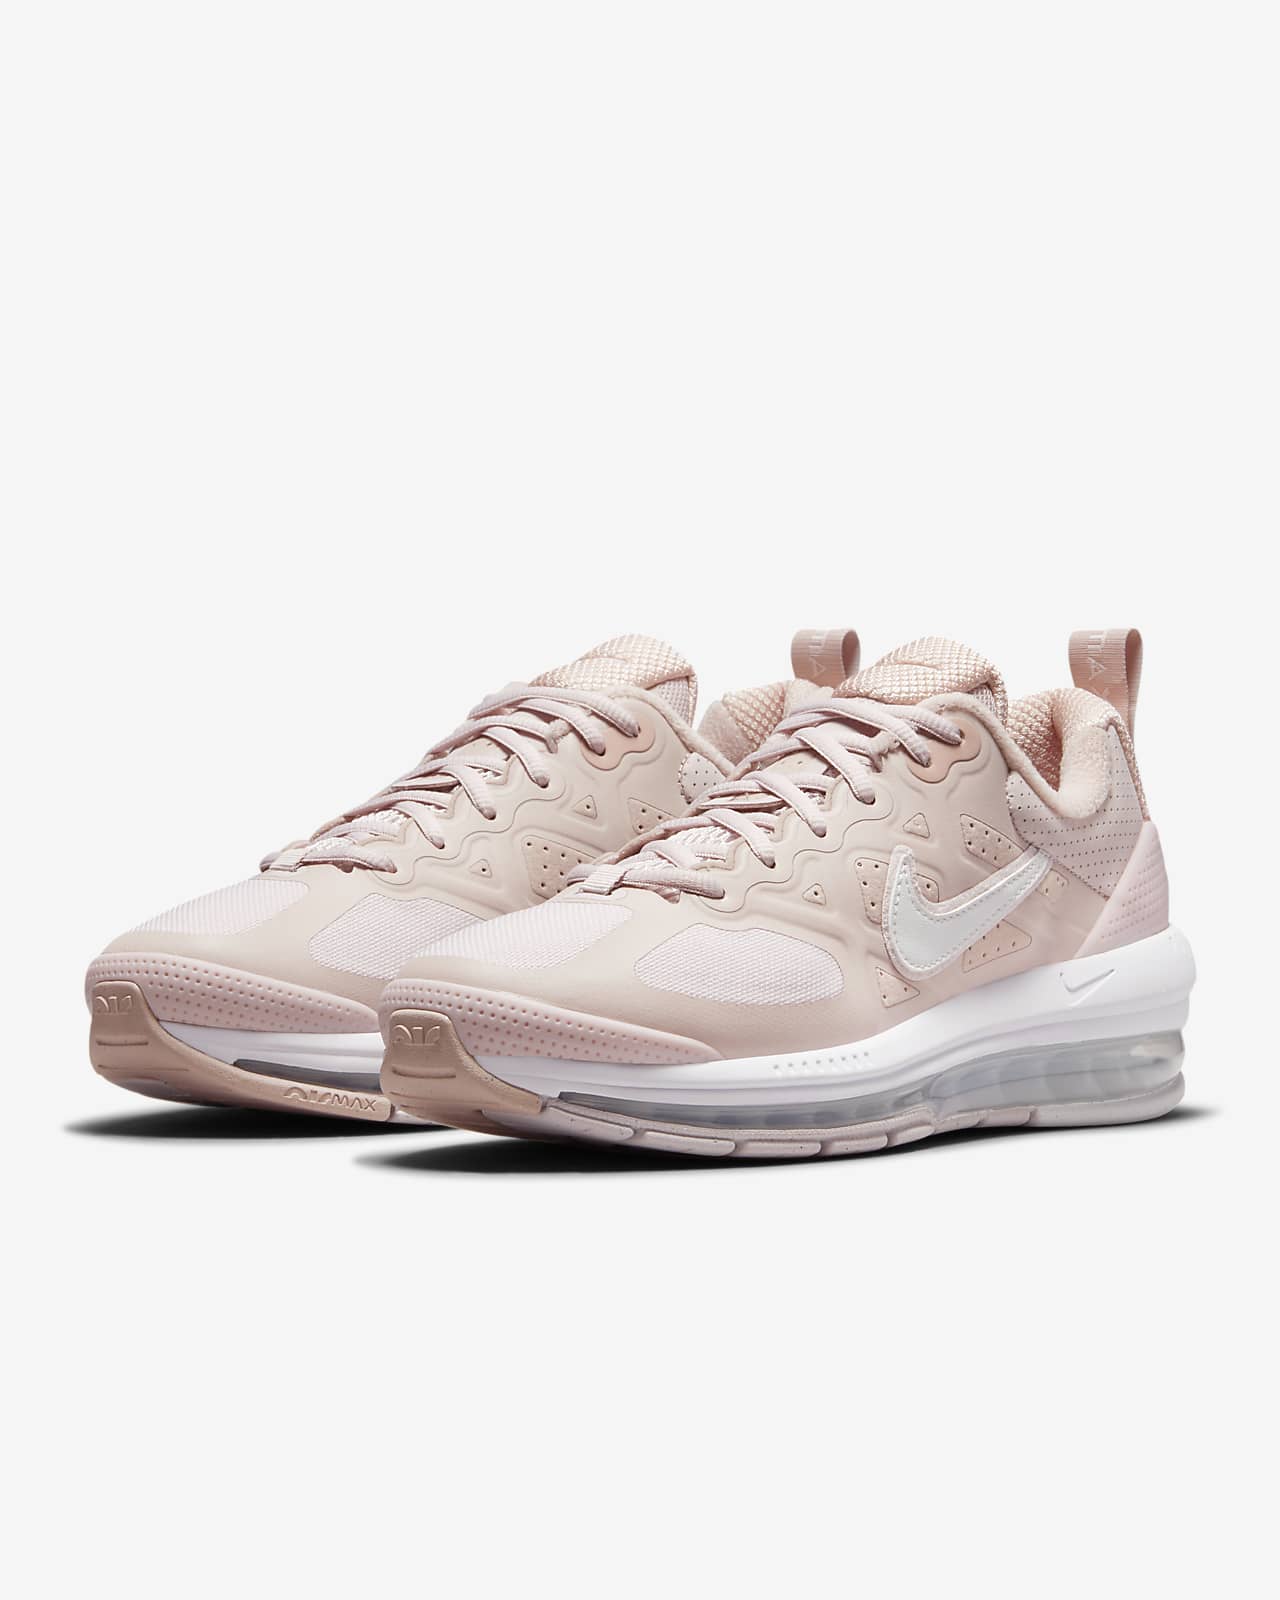 Chaussure Nike Air Max Genome pour Femme